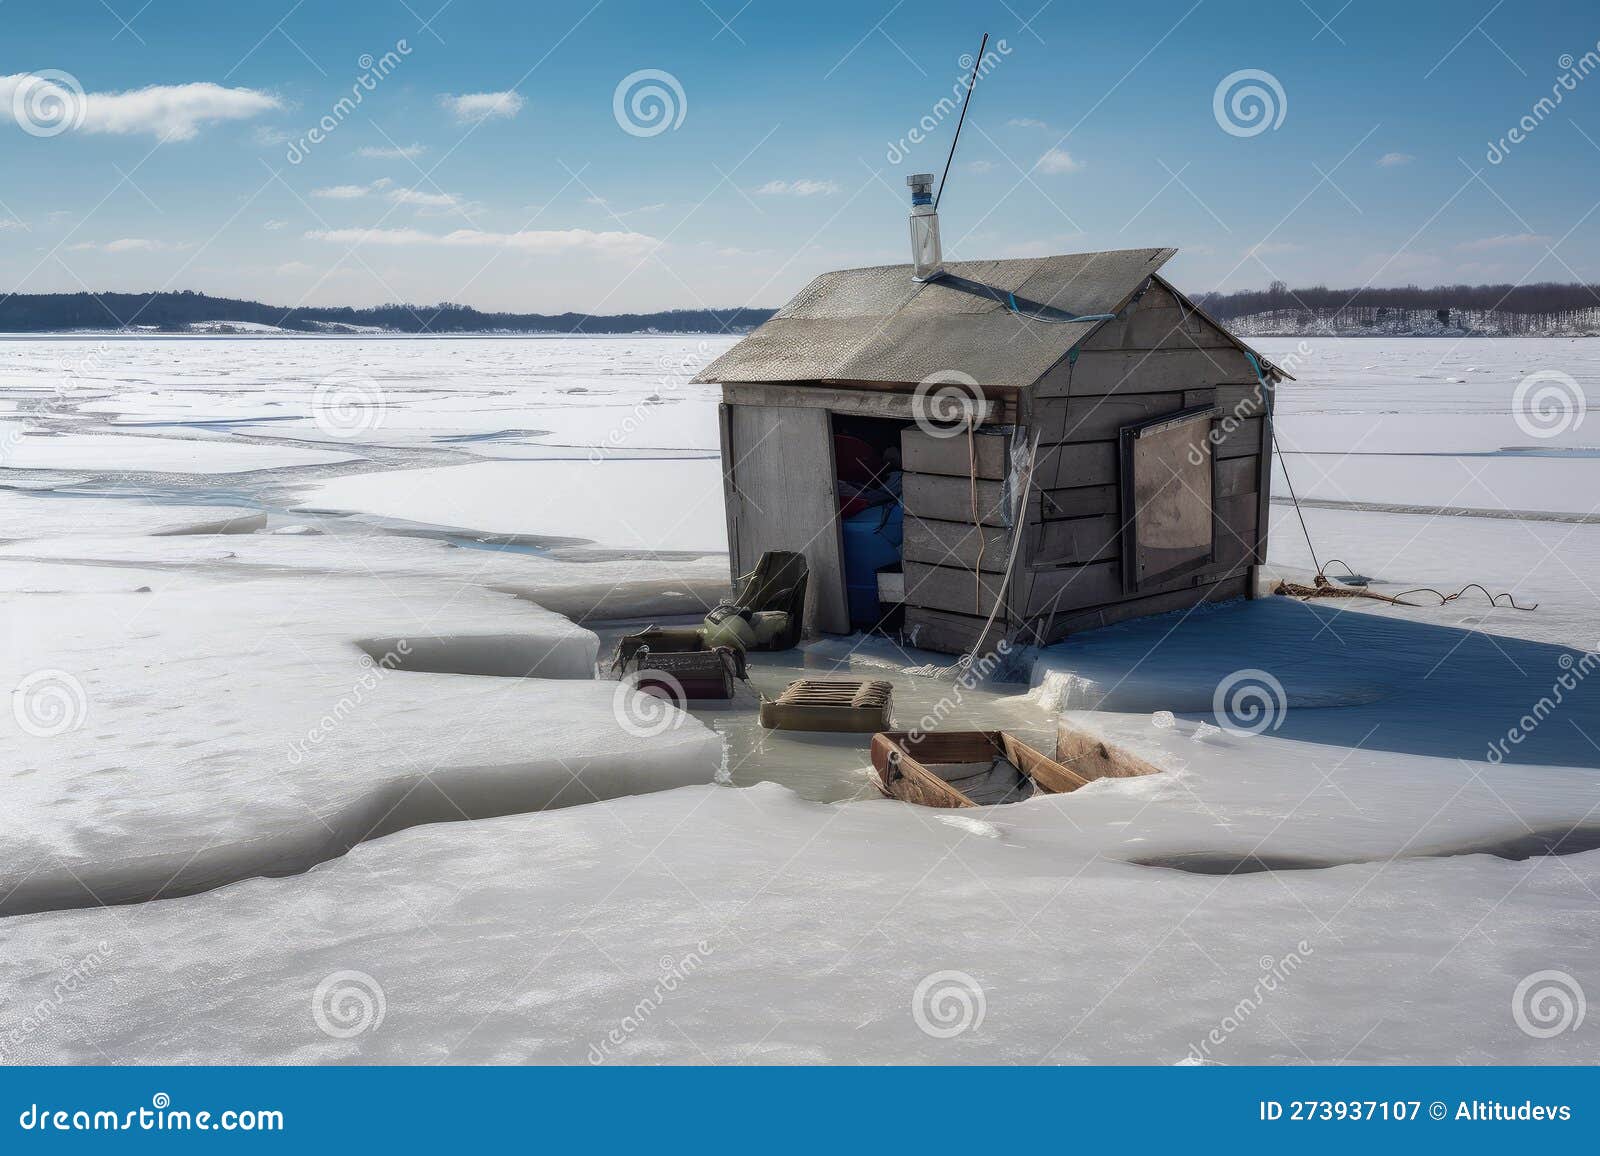 Ice Fishing Hut in Frozen River, with Lines and Tackle Ready for